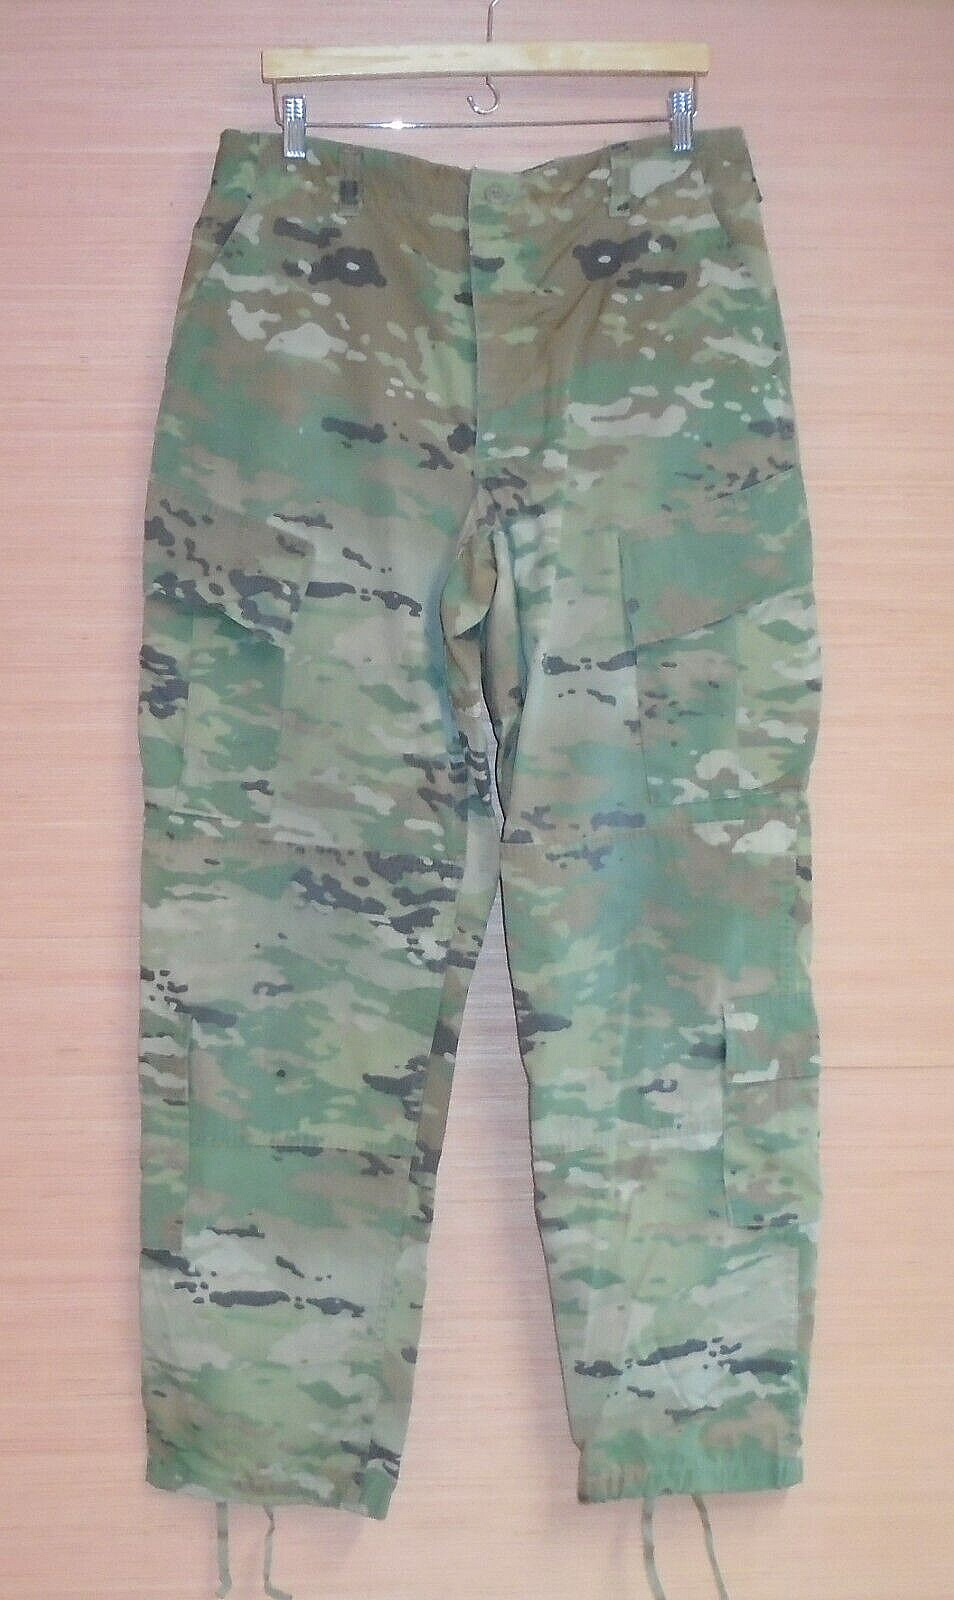 US Military Issue Unisex Army OCP Camo Combat Pants Trousers Size Medium Long